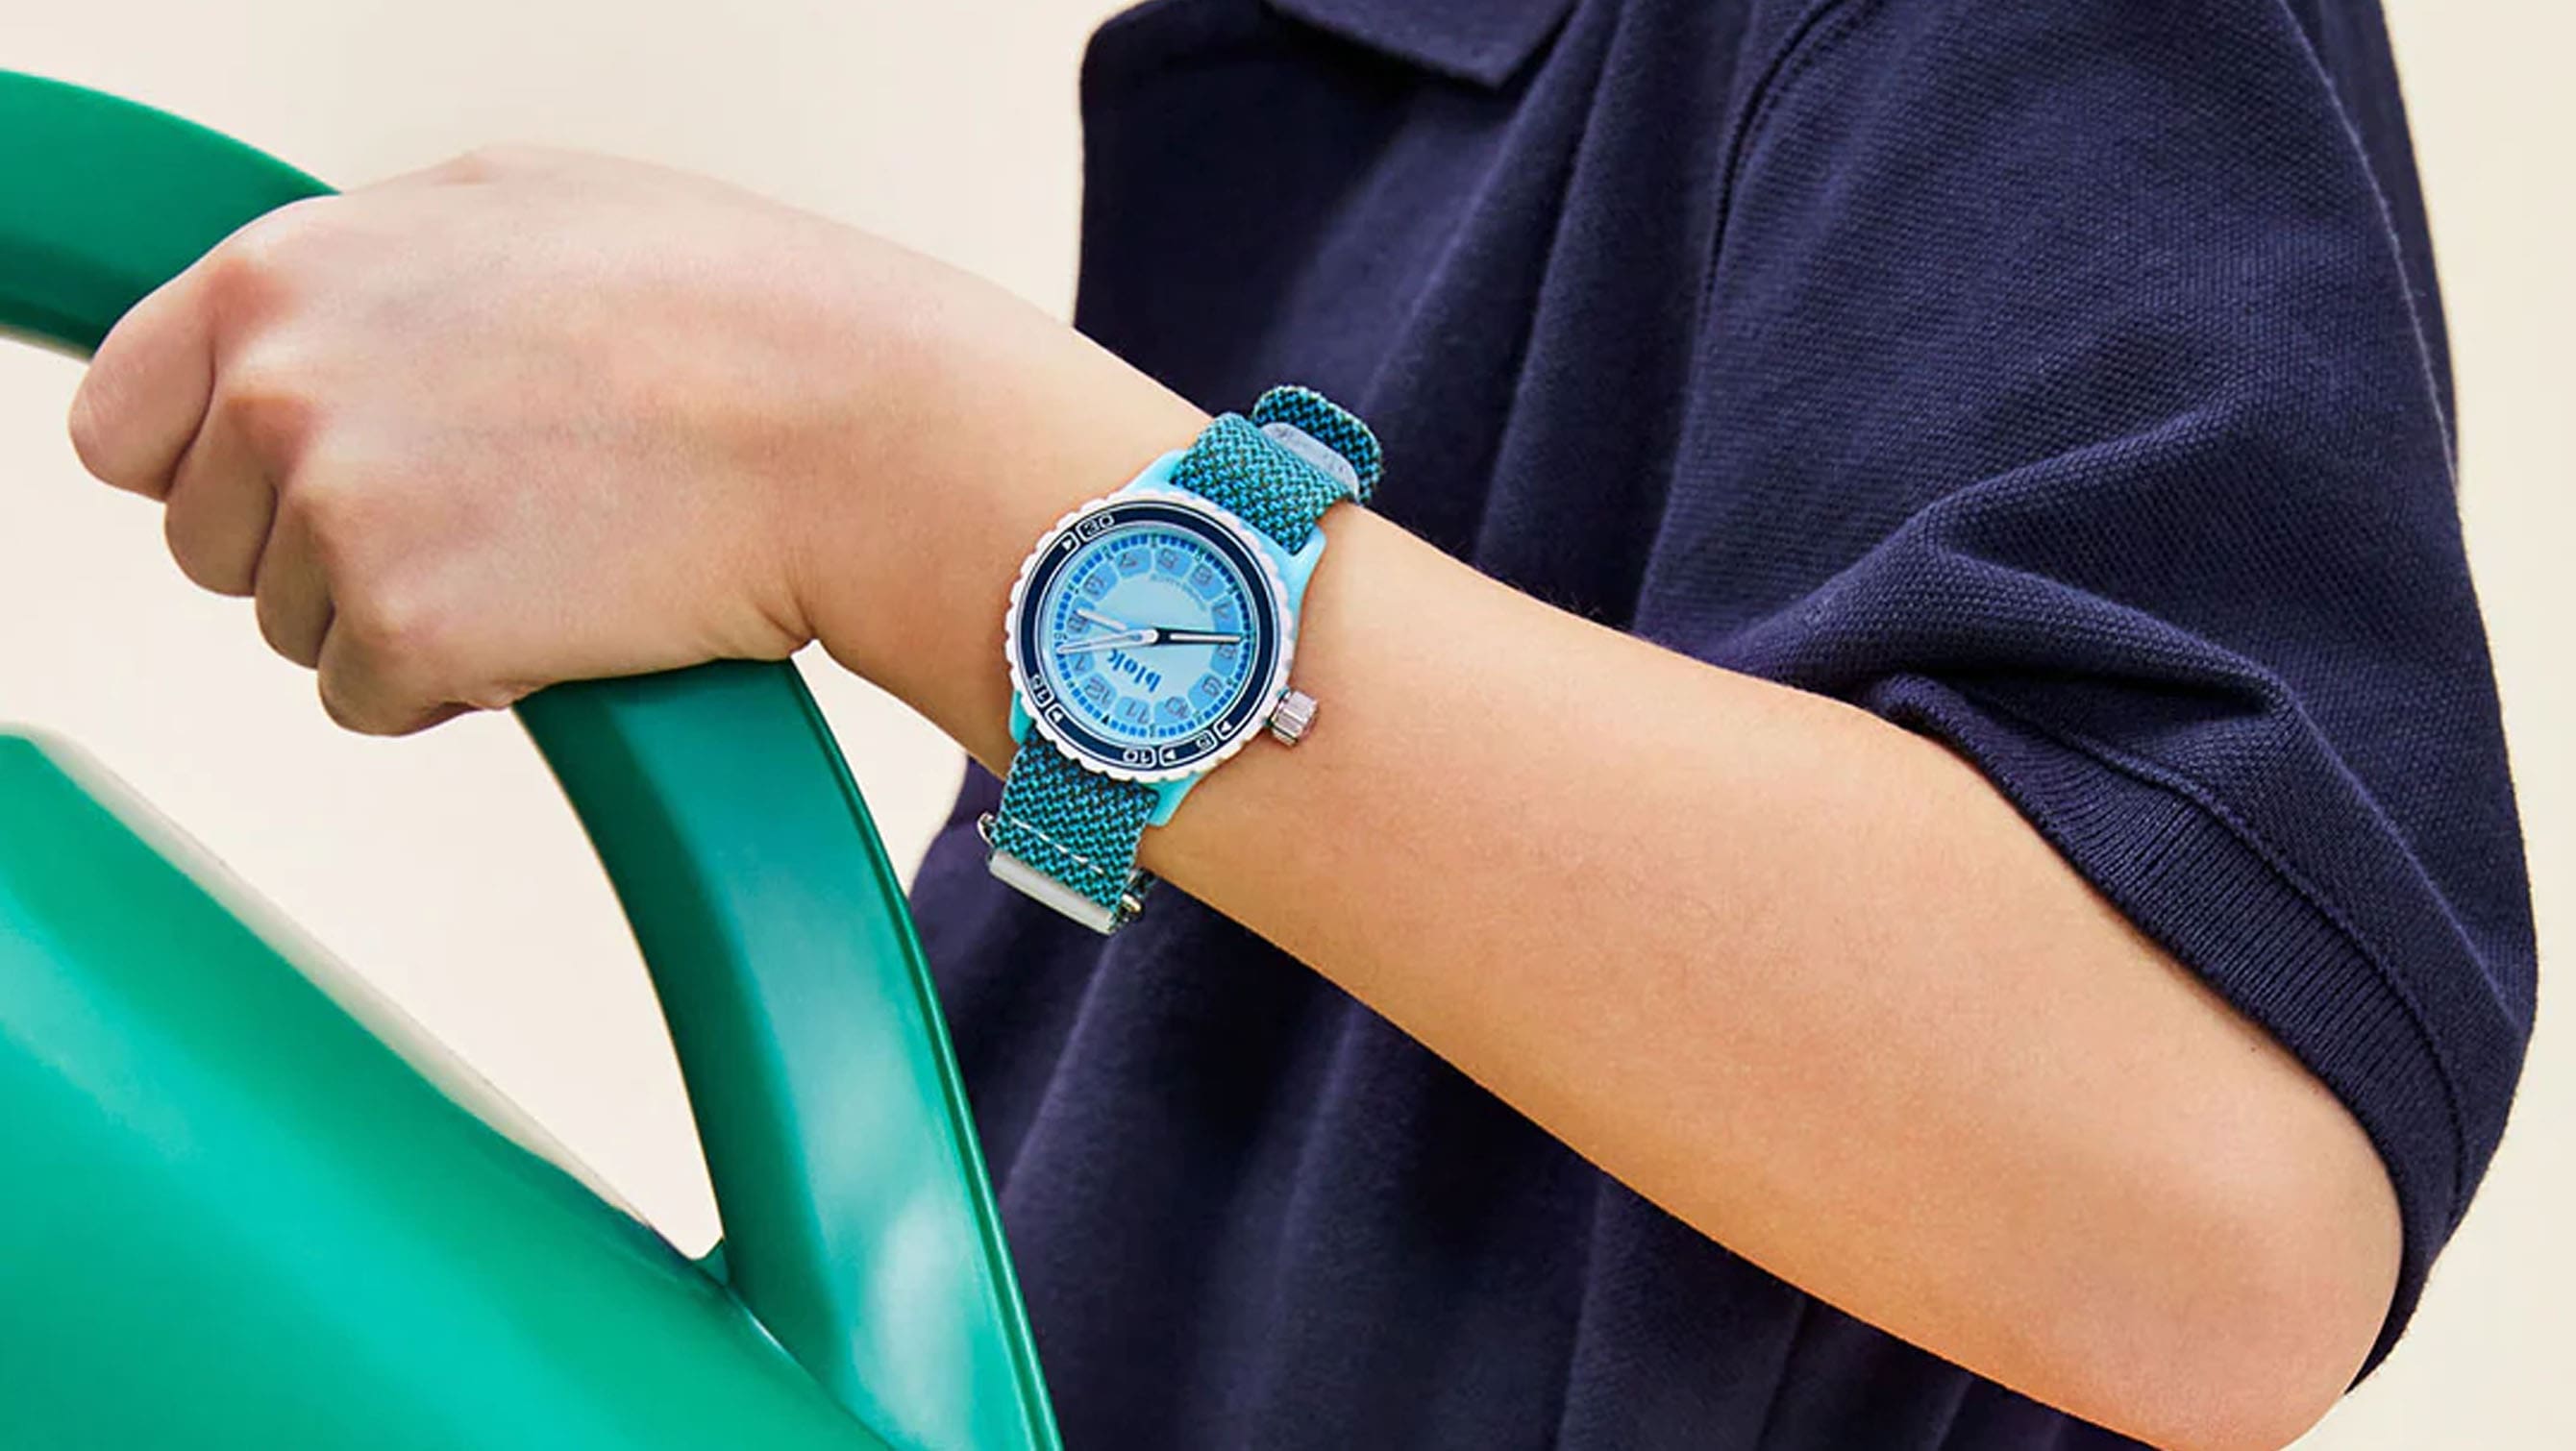 MICRO MONDAYS: Blok Watches make a tough watch specially designed for kids